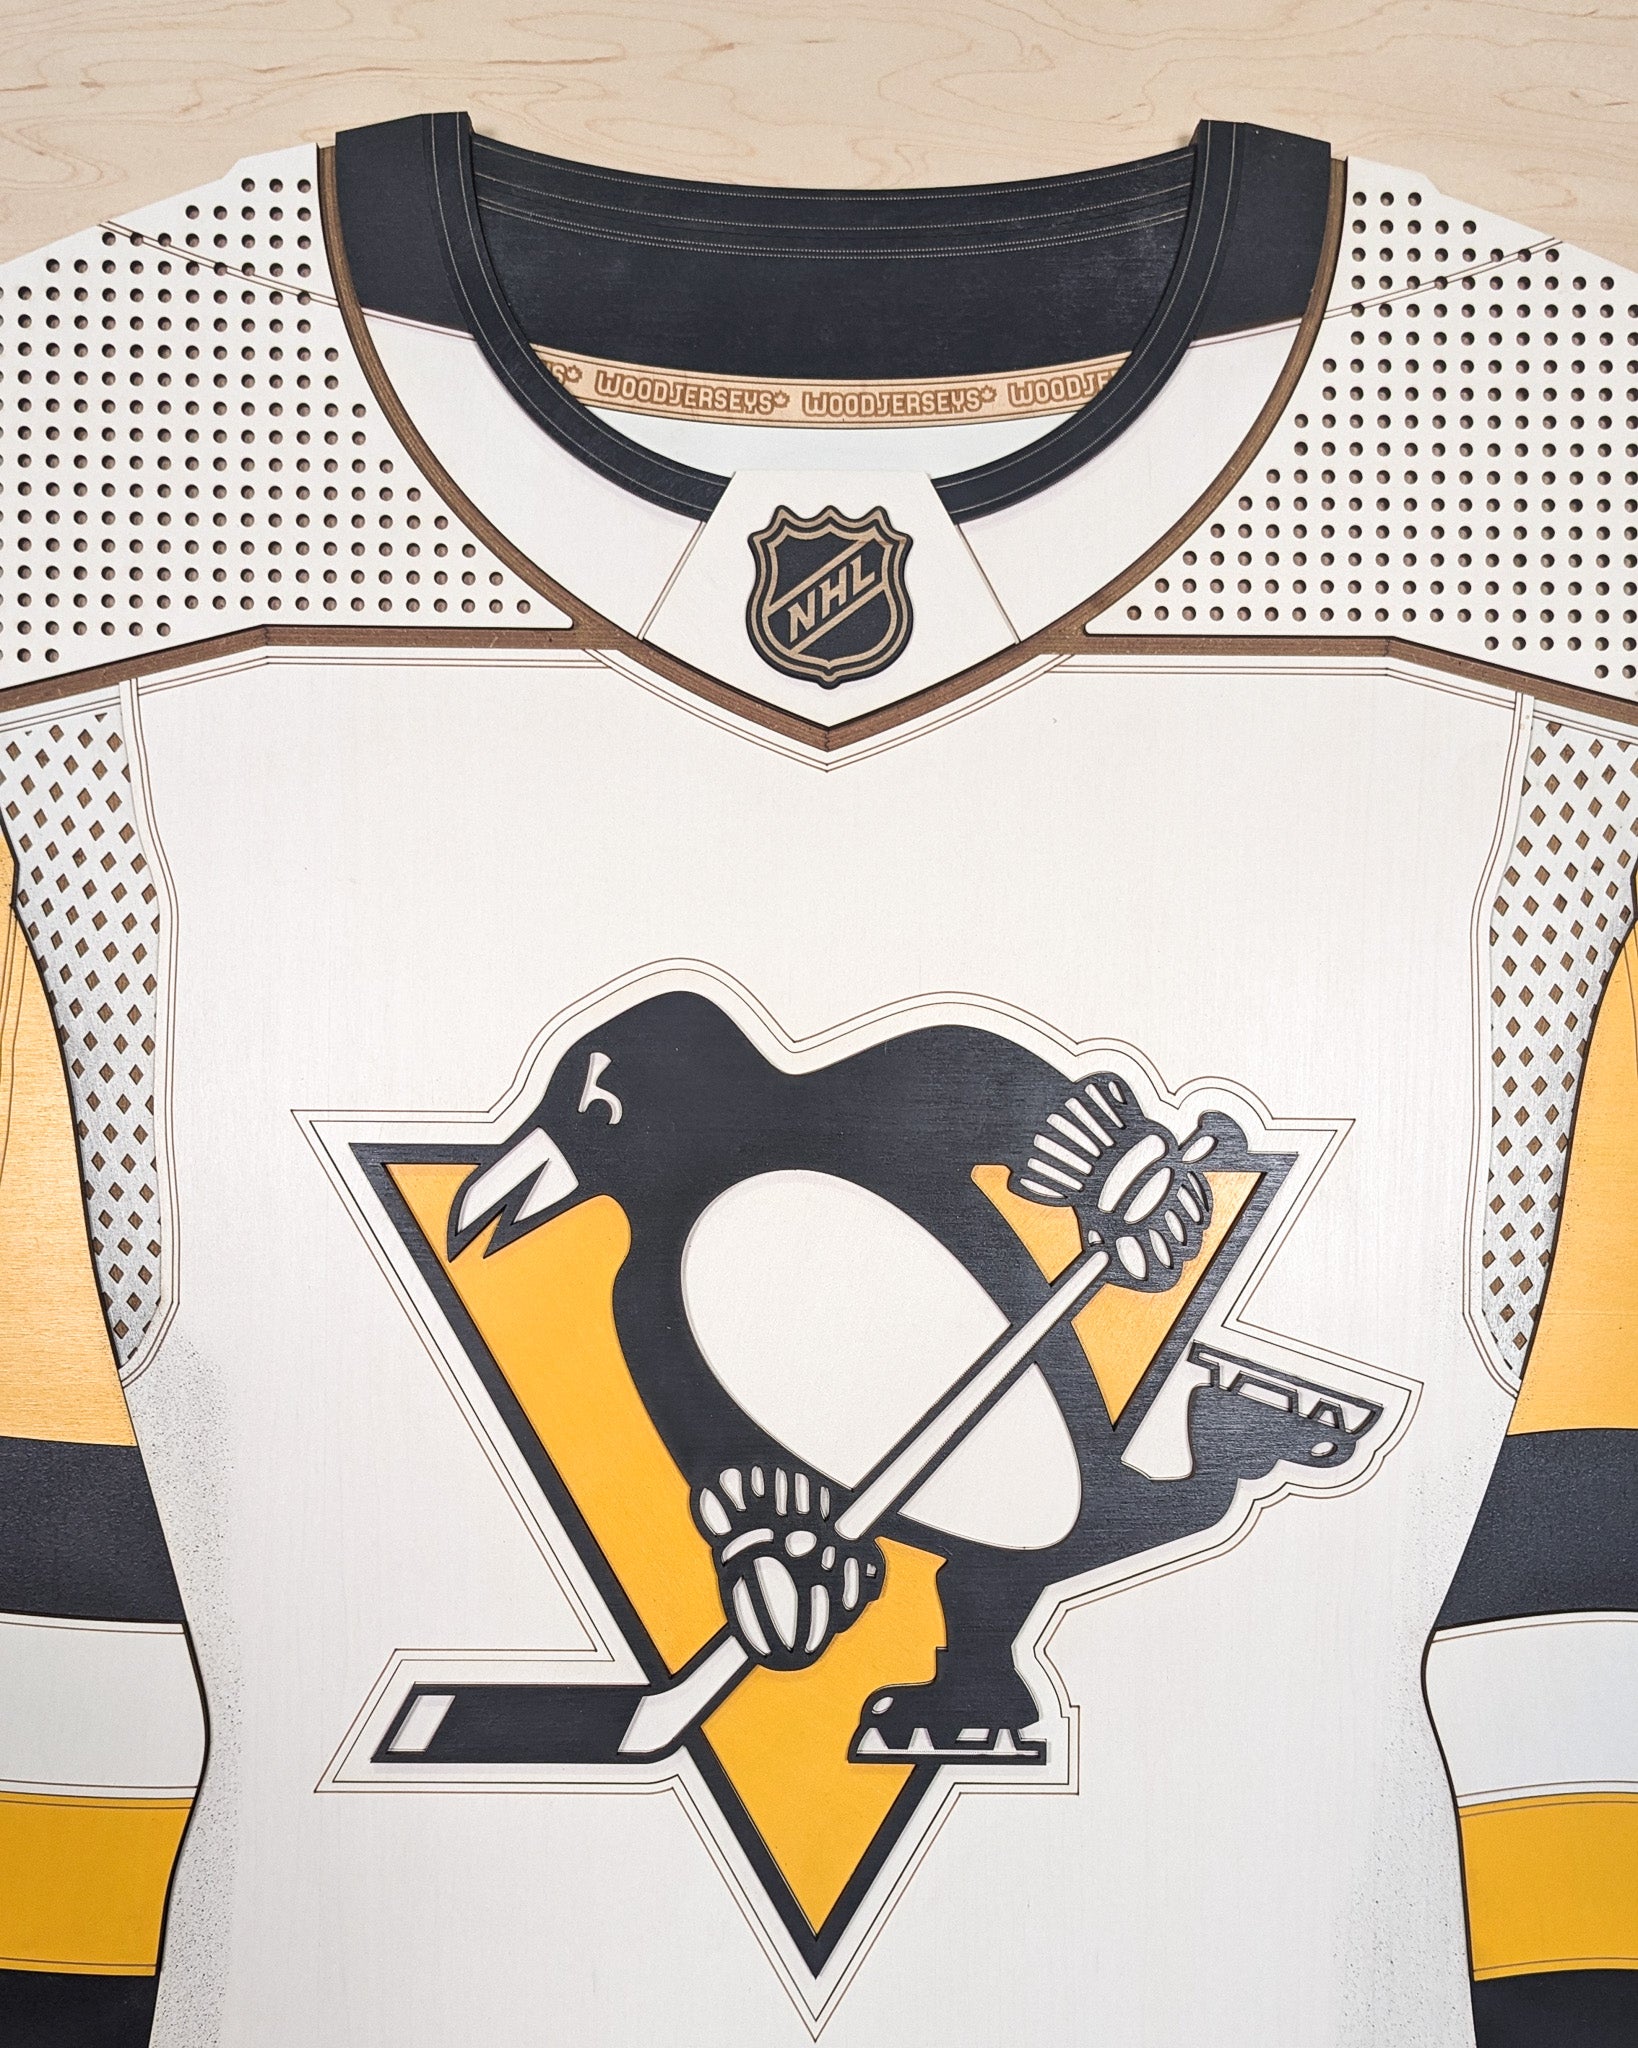 Pittsburgh Penguins Jersey 